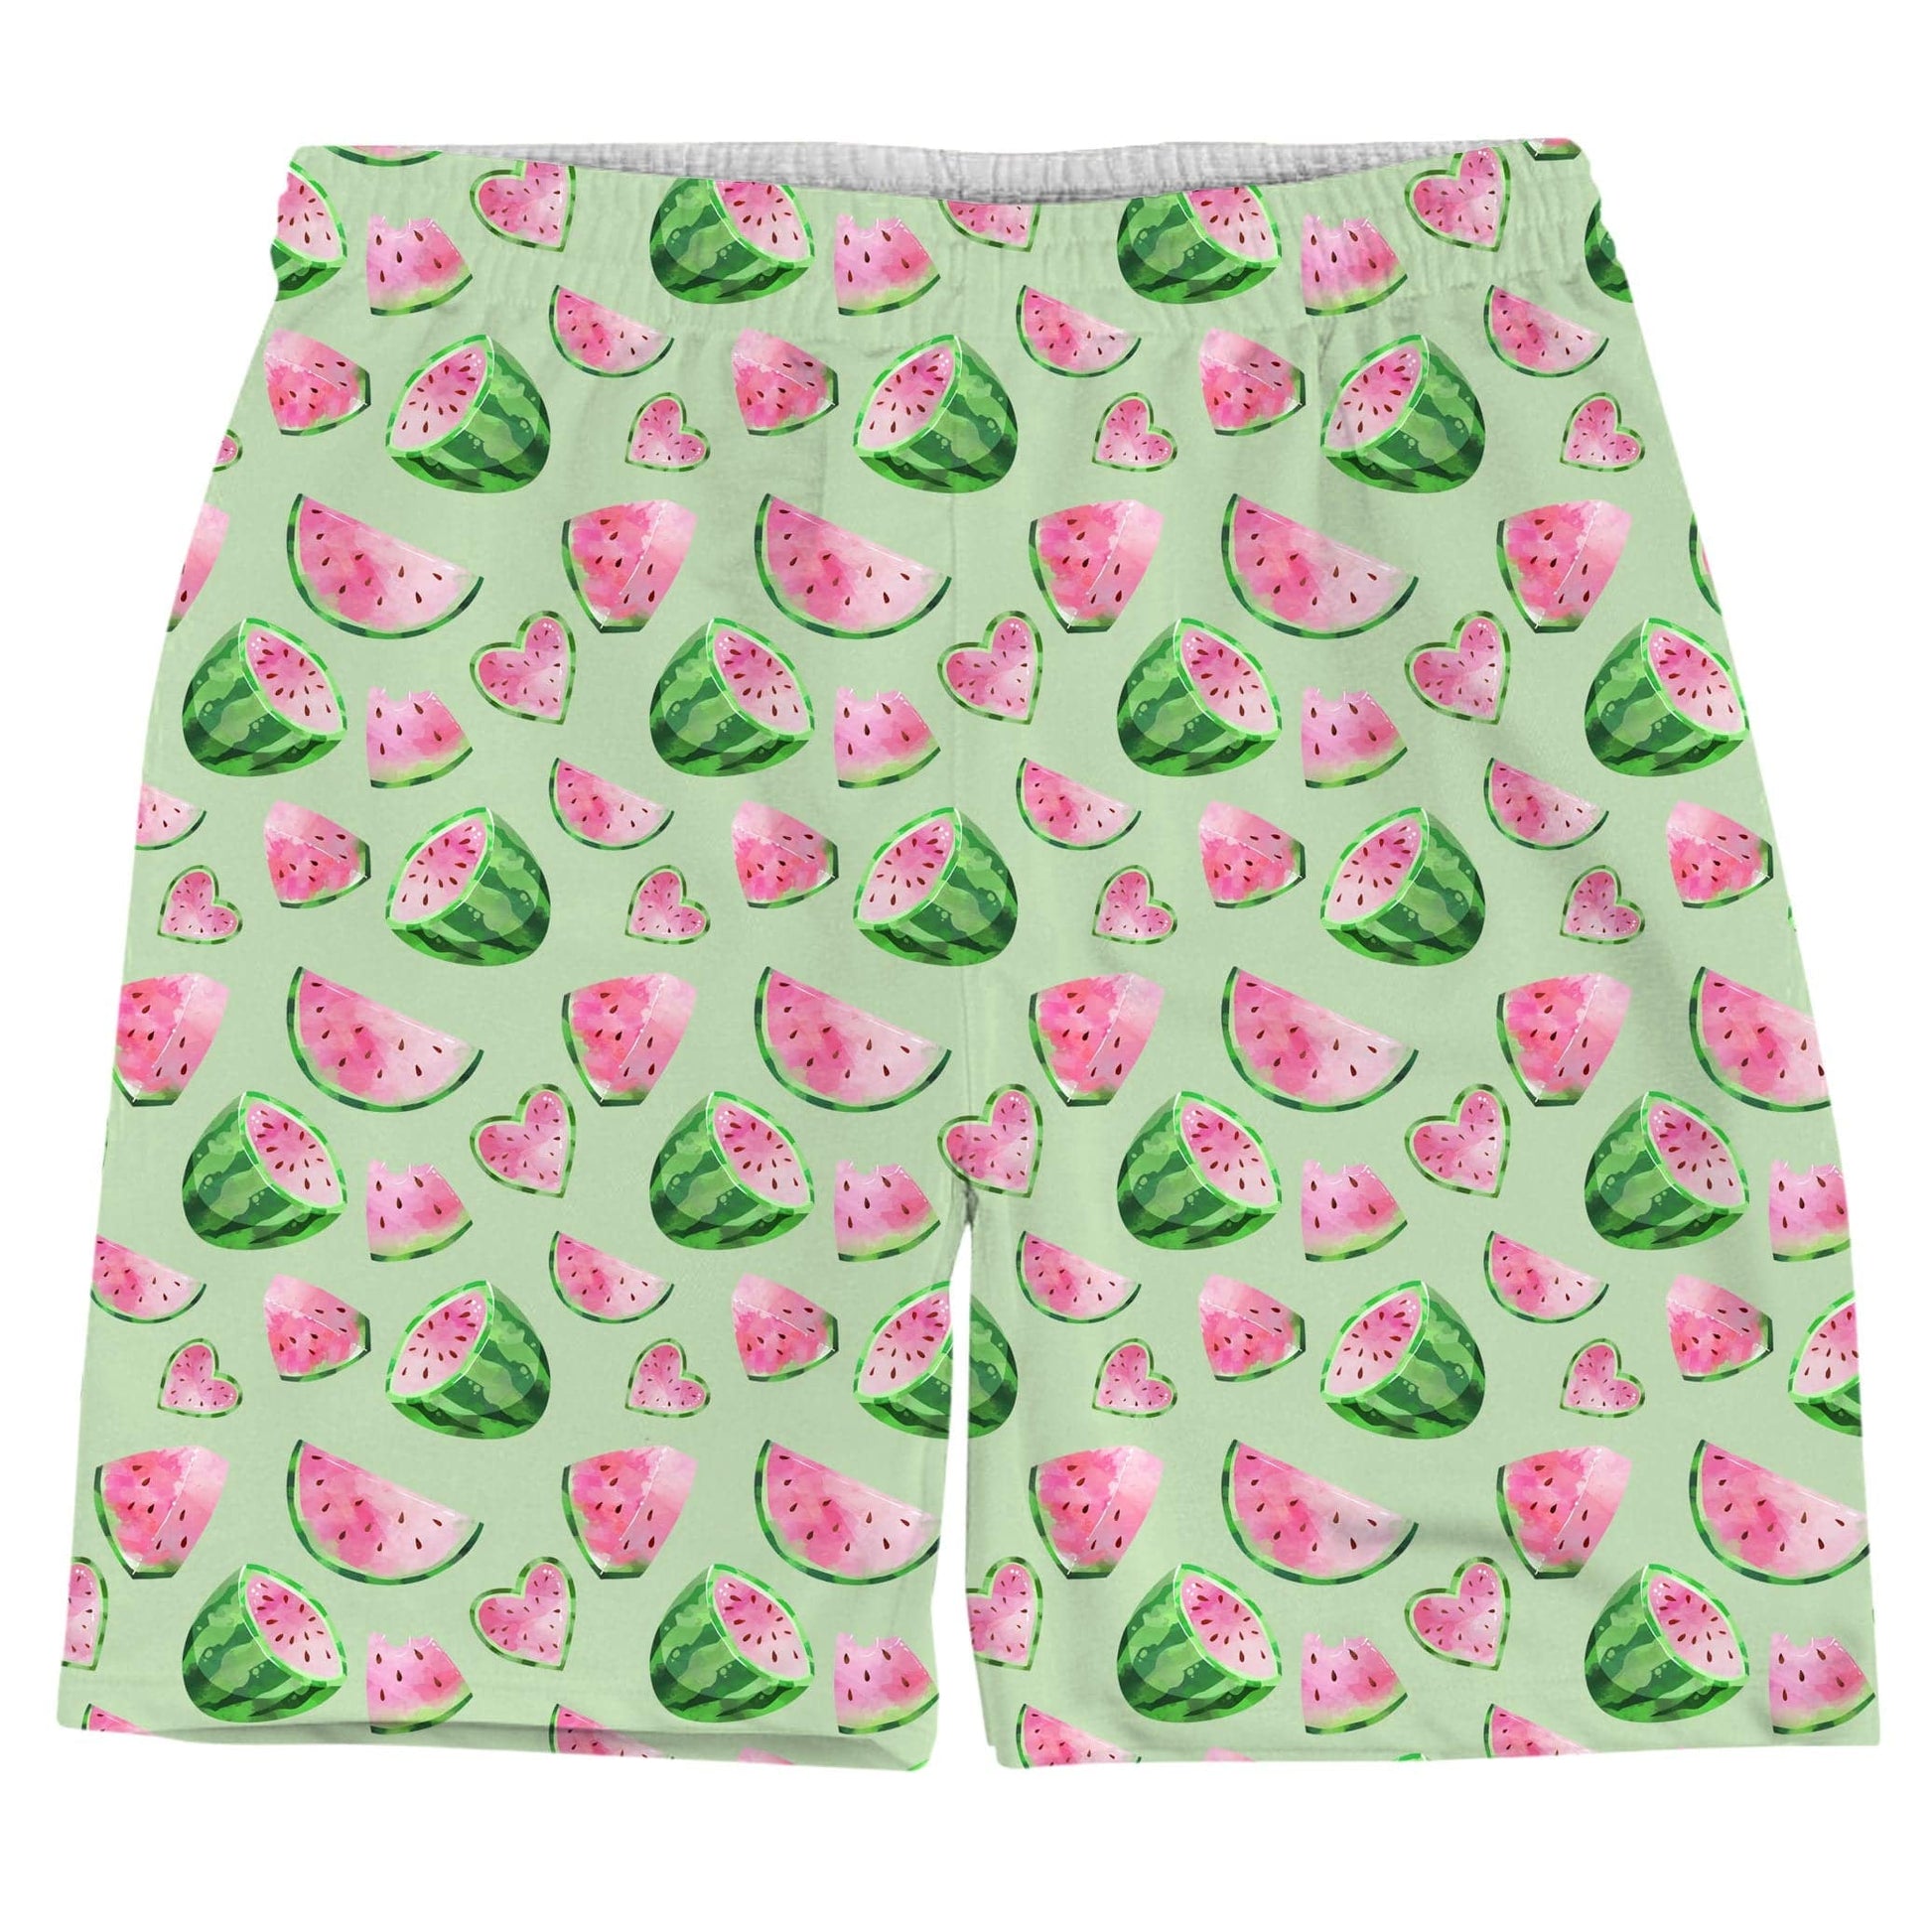 Watermelon Pattern T-Shirt and Shorts with PM 2.5 Face Mask Combo, iEDM, | iEDM